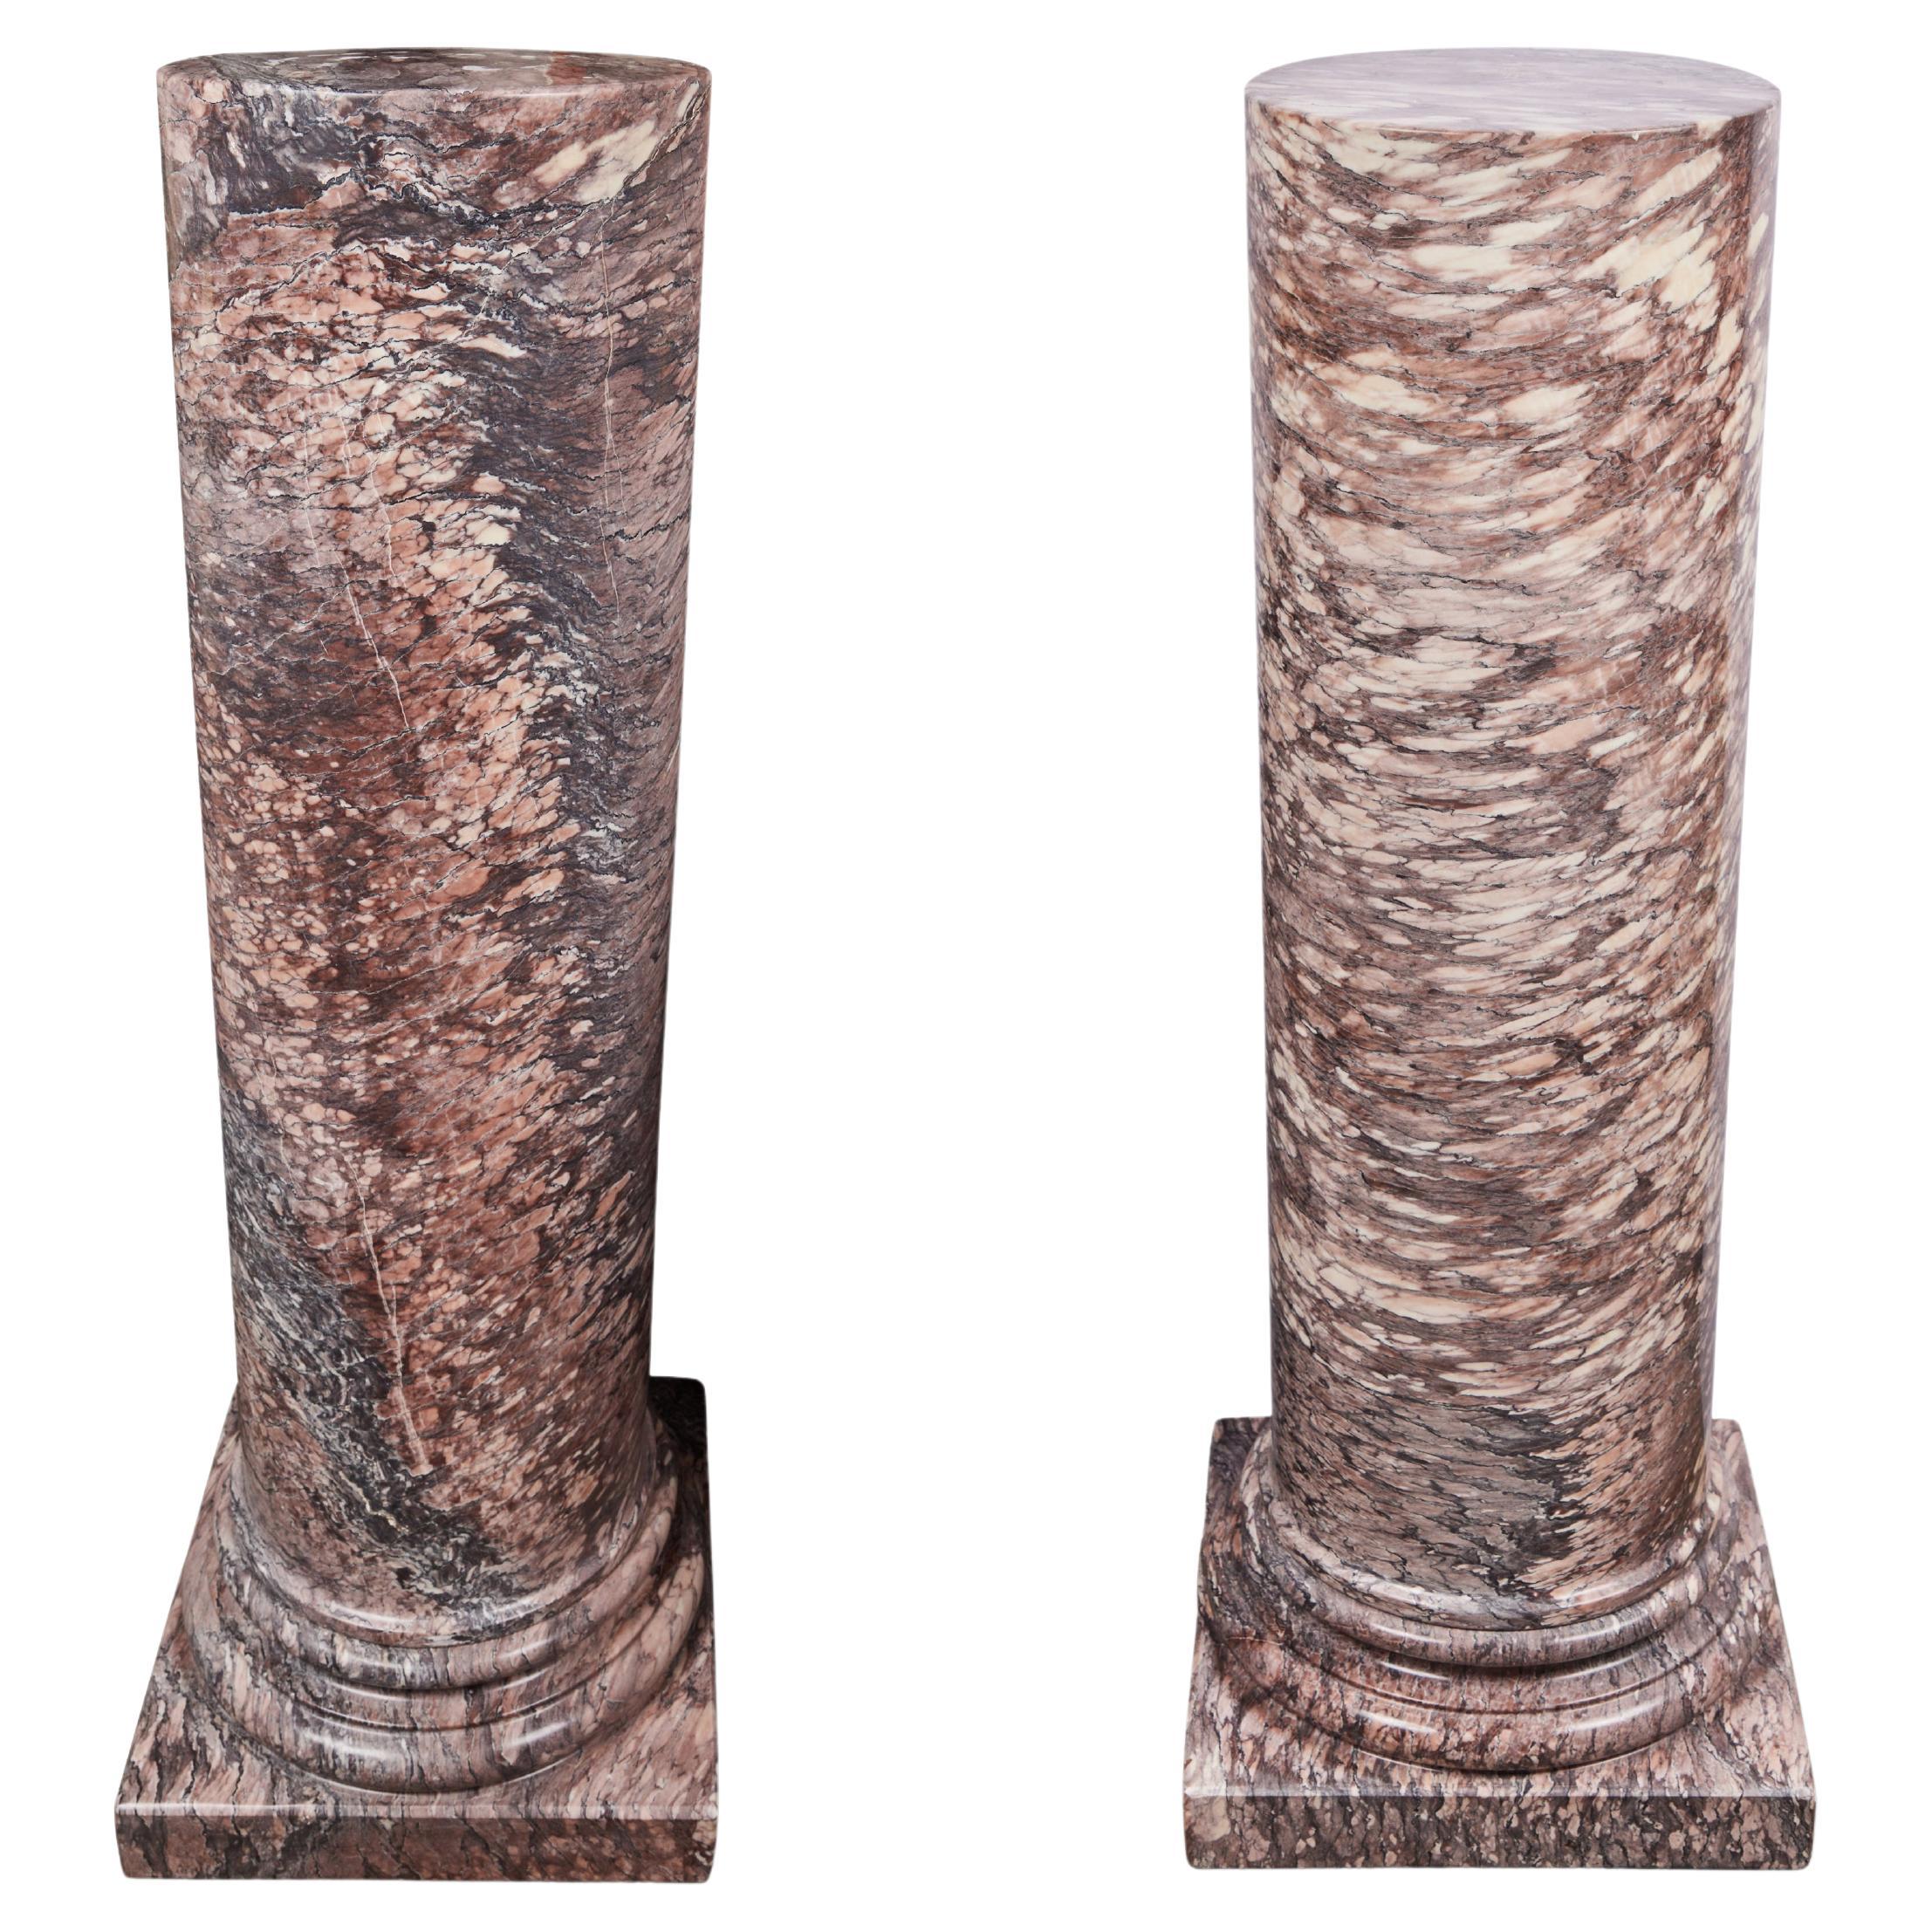 Substantial, Rouge Marble Columns For Sale